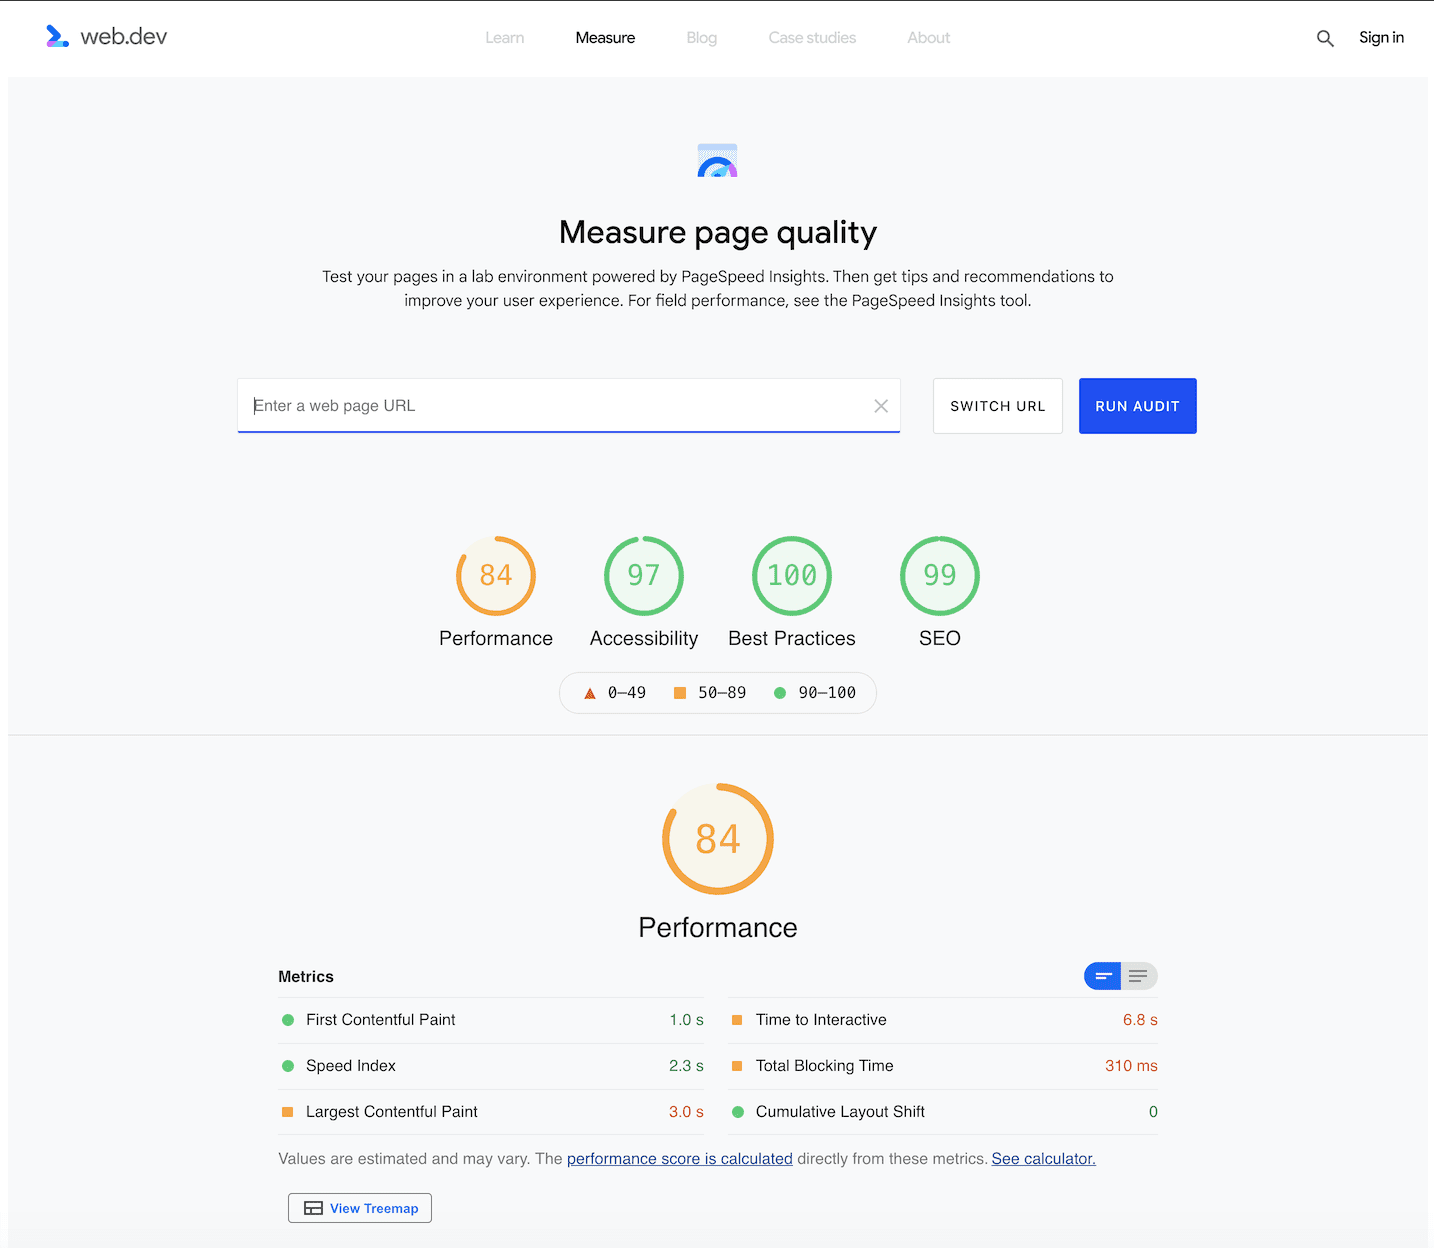 The refreshed version of the measure tool focusing on offering page quality measurement.